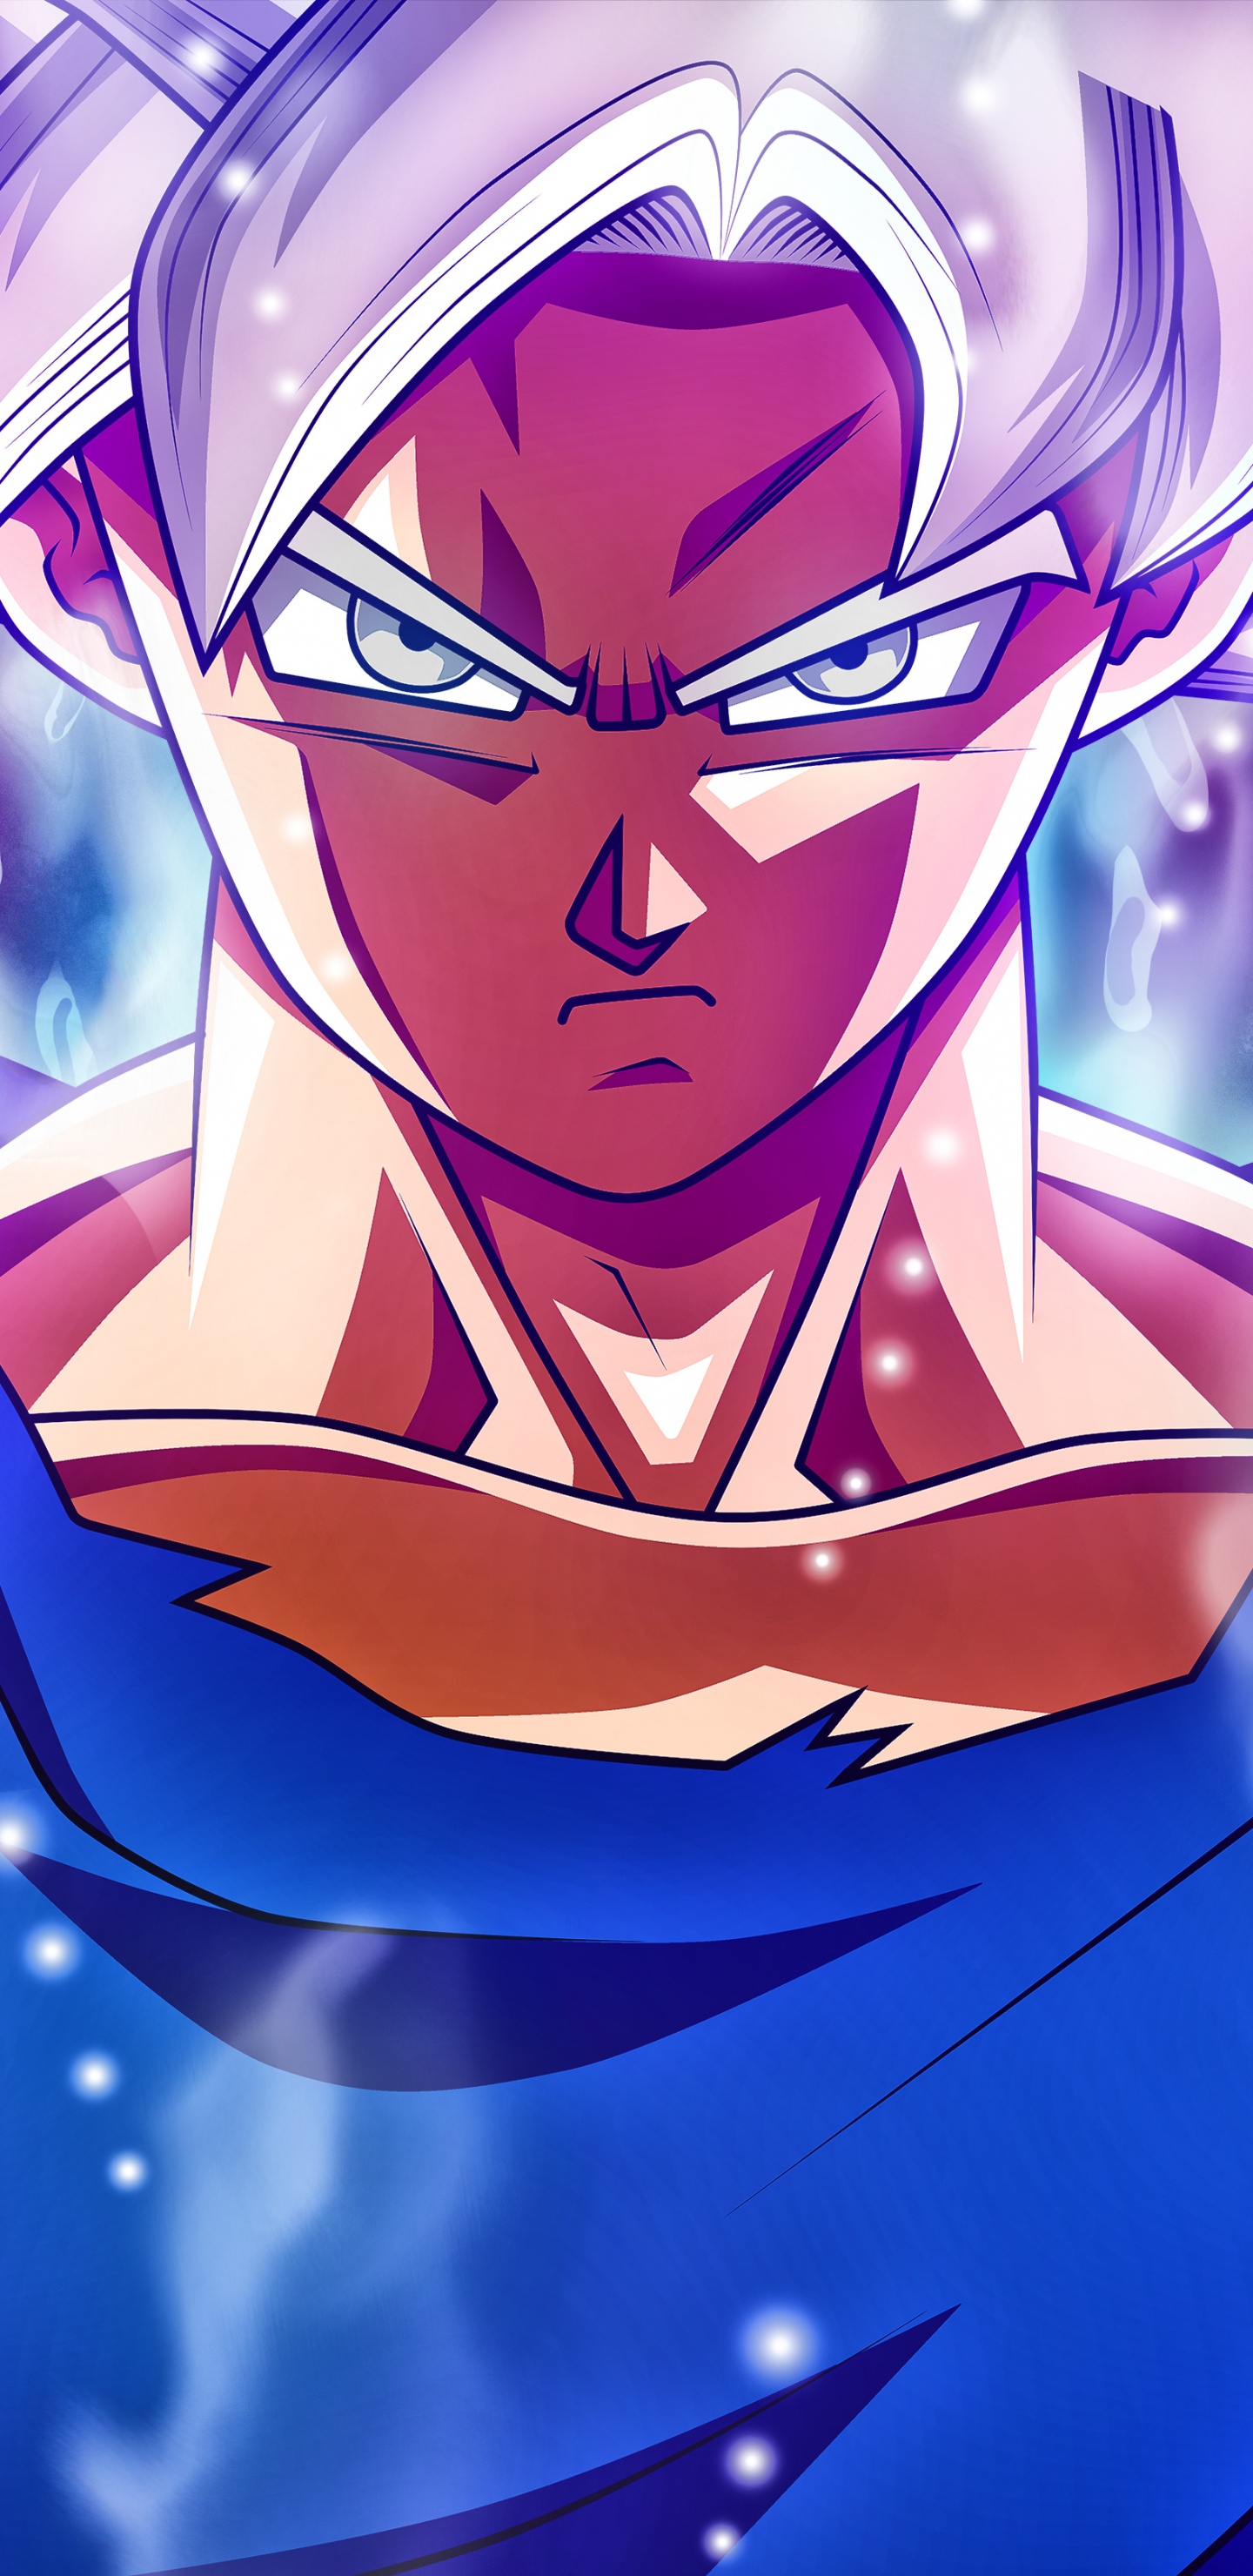 Personnage D'anime Masculin Aux Cheveux Bleus. Wallpaper in 1440x2960 Resolution